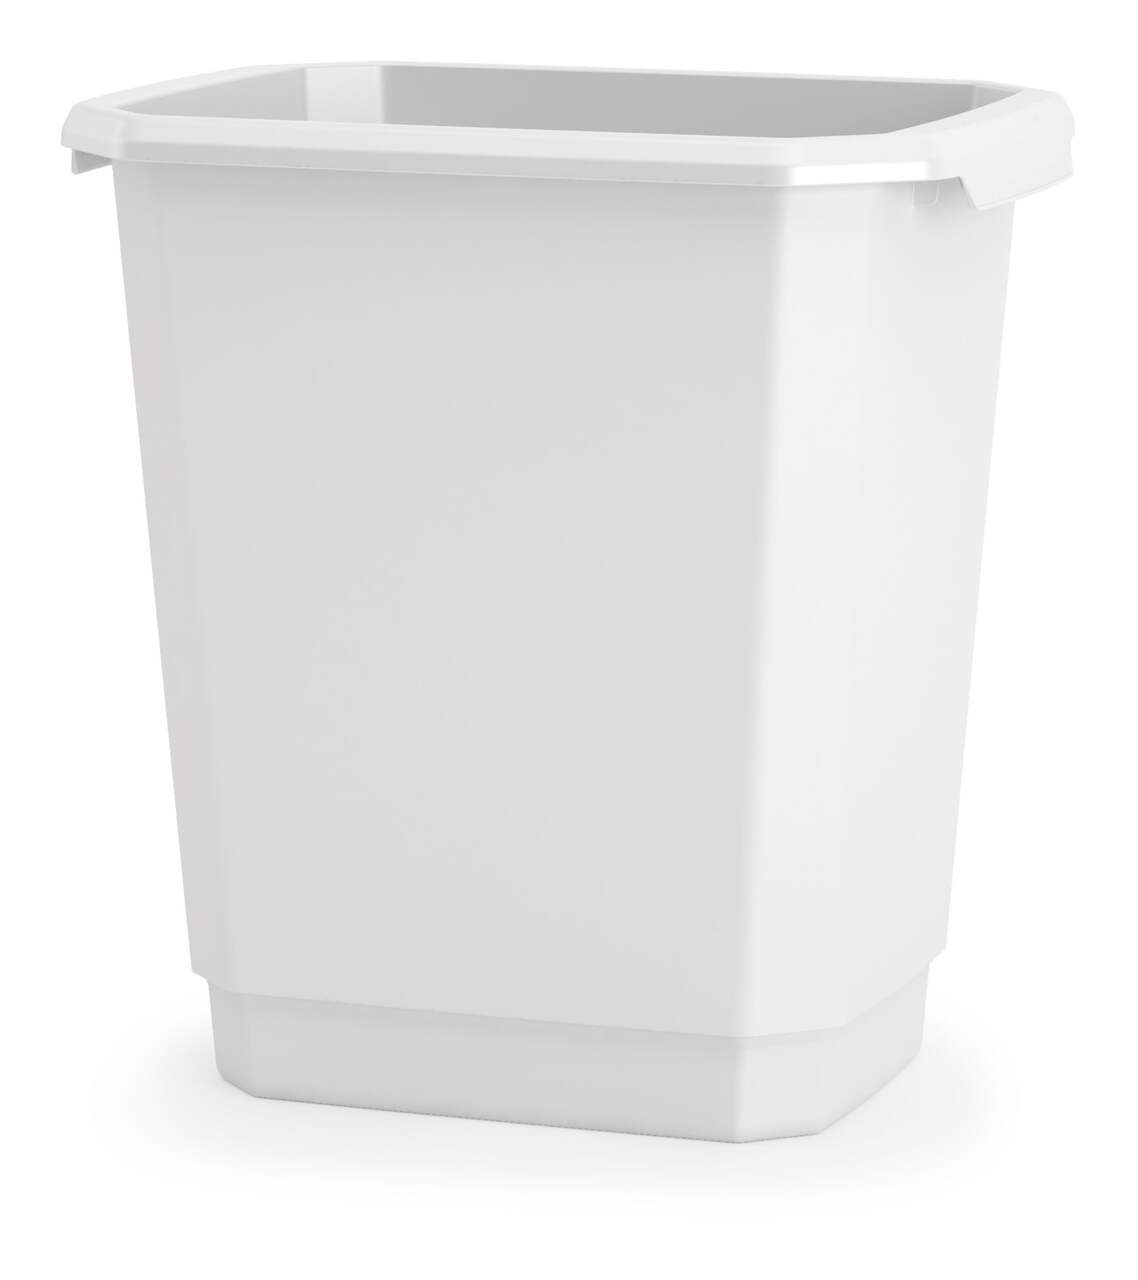 type A Plastic Open Rectangular Kitchen Garbage Can, White, 14-L